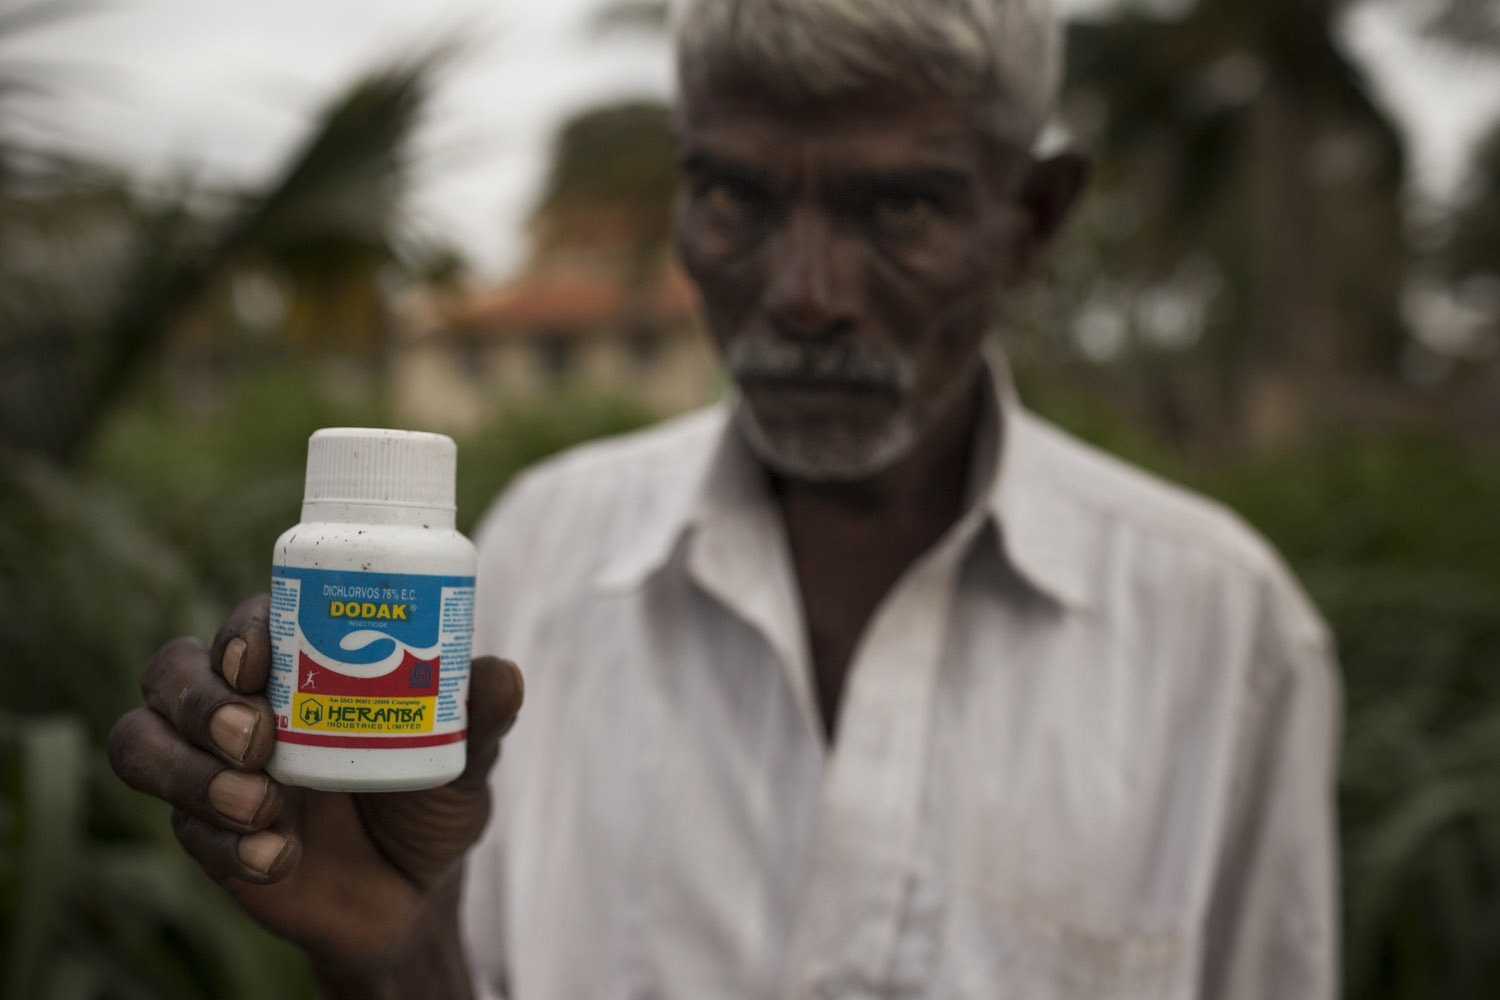 Shivalinga Gowda, 50, holds a bottle of insecticide like the one his 23-year-old son Madhu consumed to kill himself after accumulating large debts while managing the family farm in the village of Arechakanahalli [Janos Chiala/Al Jazeera]